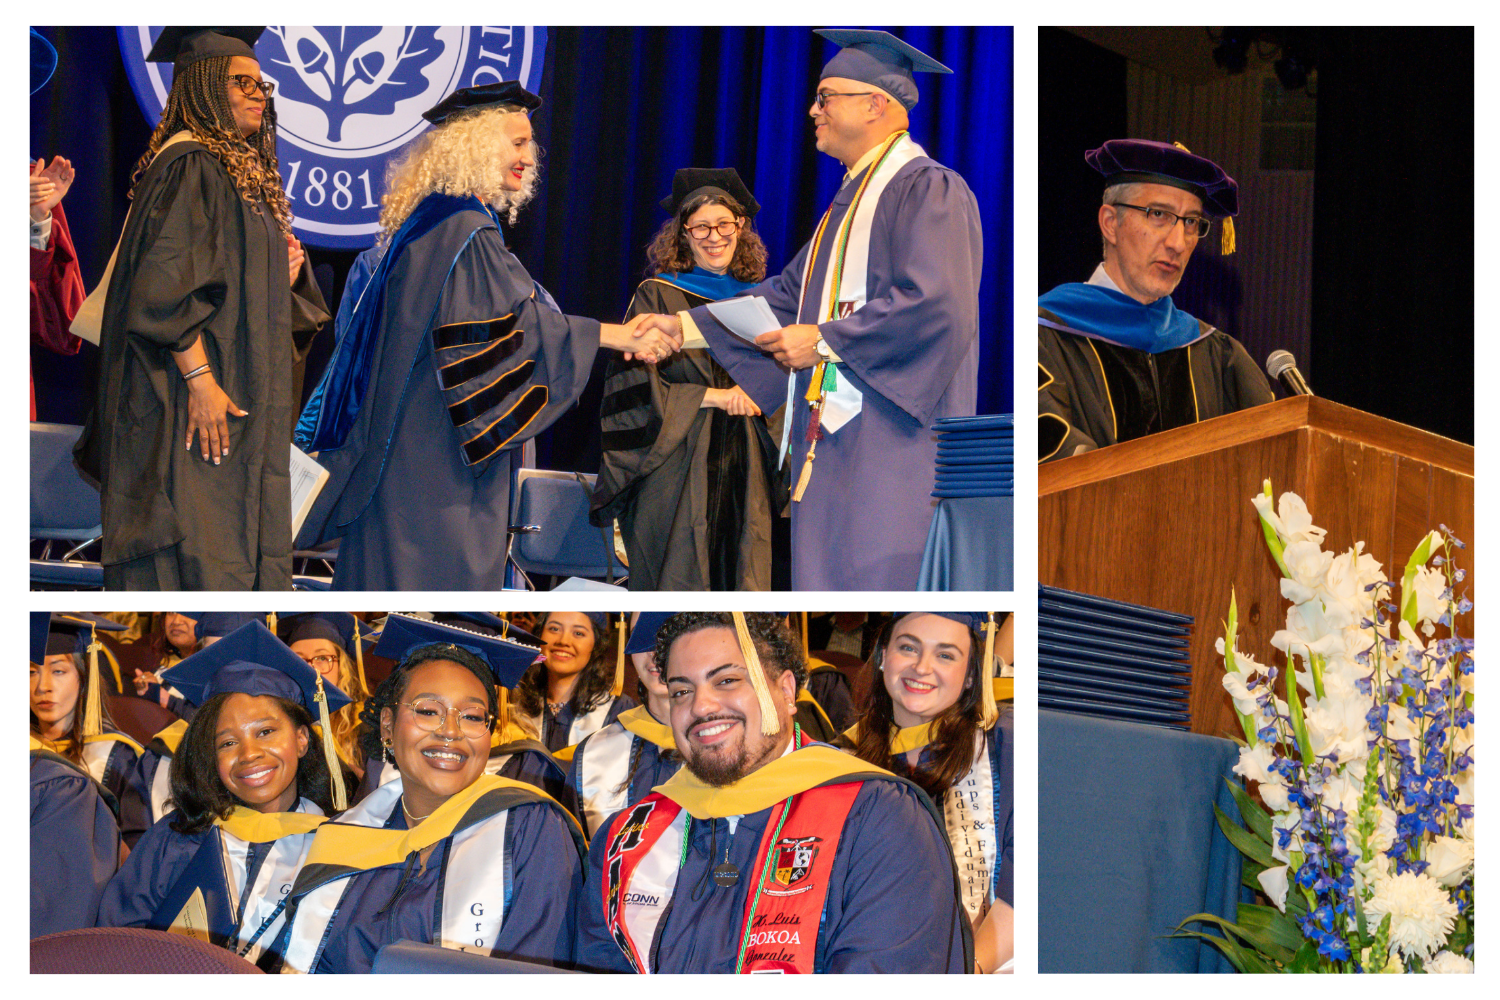 Collage of photos from UConn School of Social Work's 2024 Commencement, including image of the university President shaking hands with student speaker Juan Torres, a group of students in the audience, and Associate Dean for Academic Affairs Scott Harding at the podium.